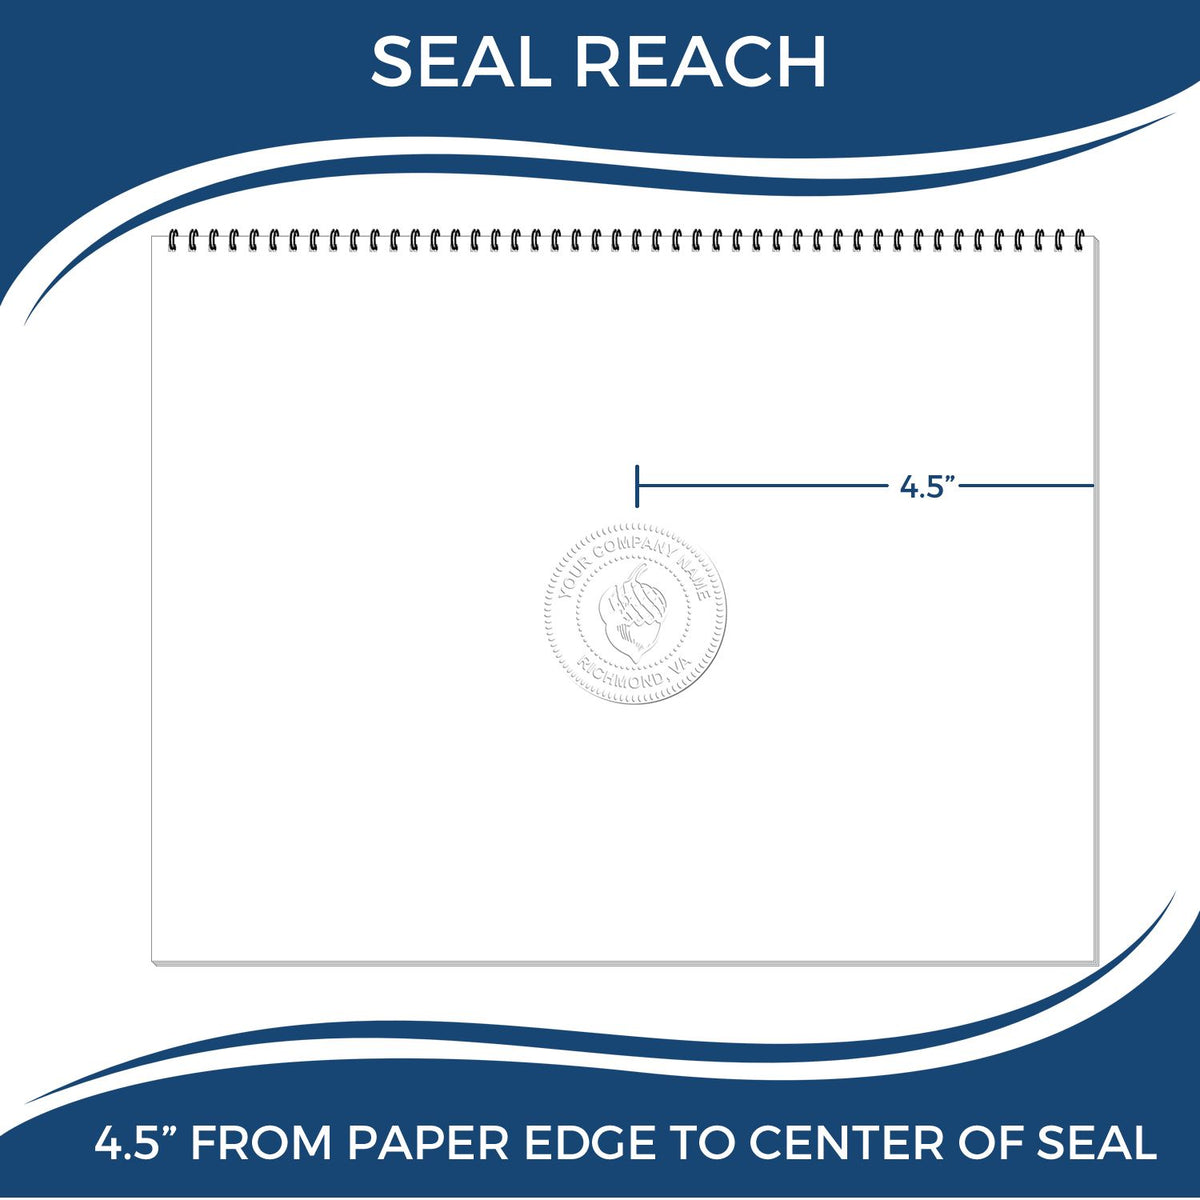 An infographic showing the seal reach which is represented by a ruler and a miniature seal image of the Extended Long Reach Arizona Surveyor Embosser